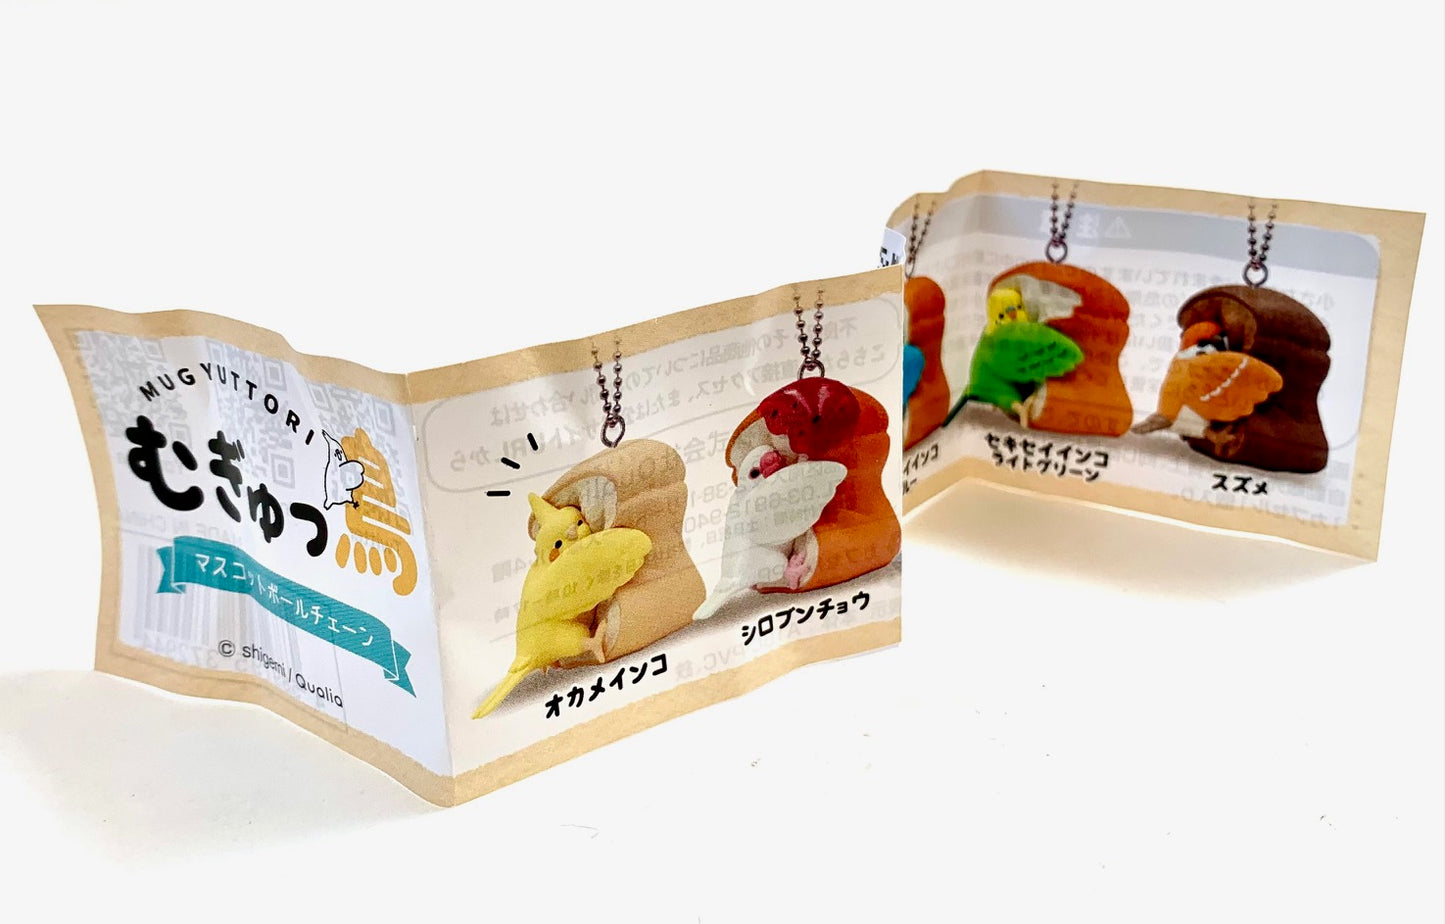 X 70869 Bird and Bread Capsules-DISCONTINUED